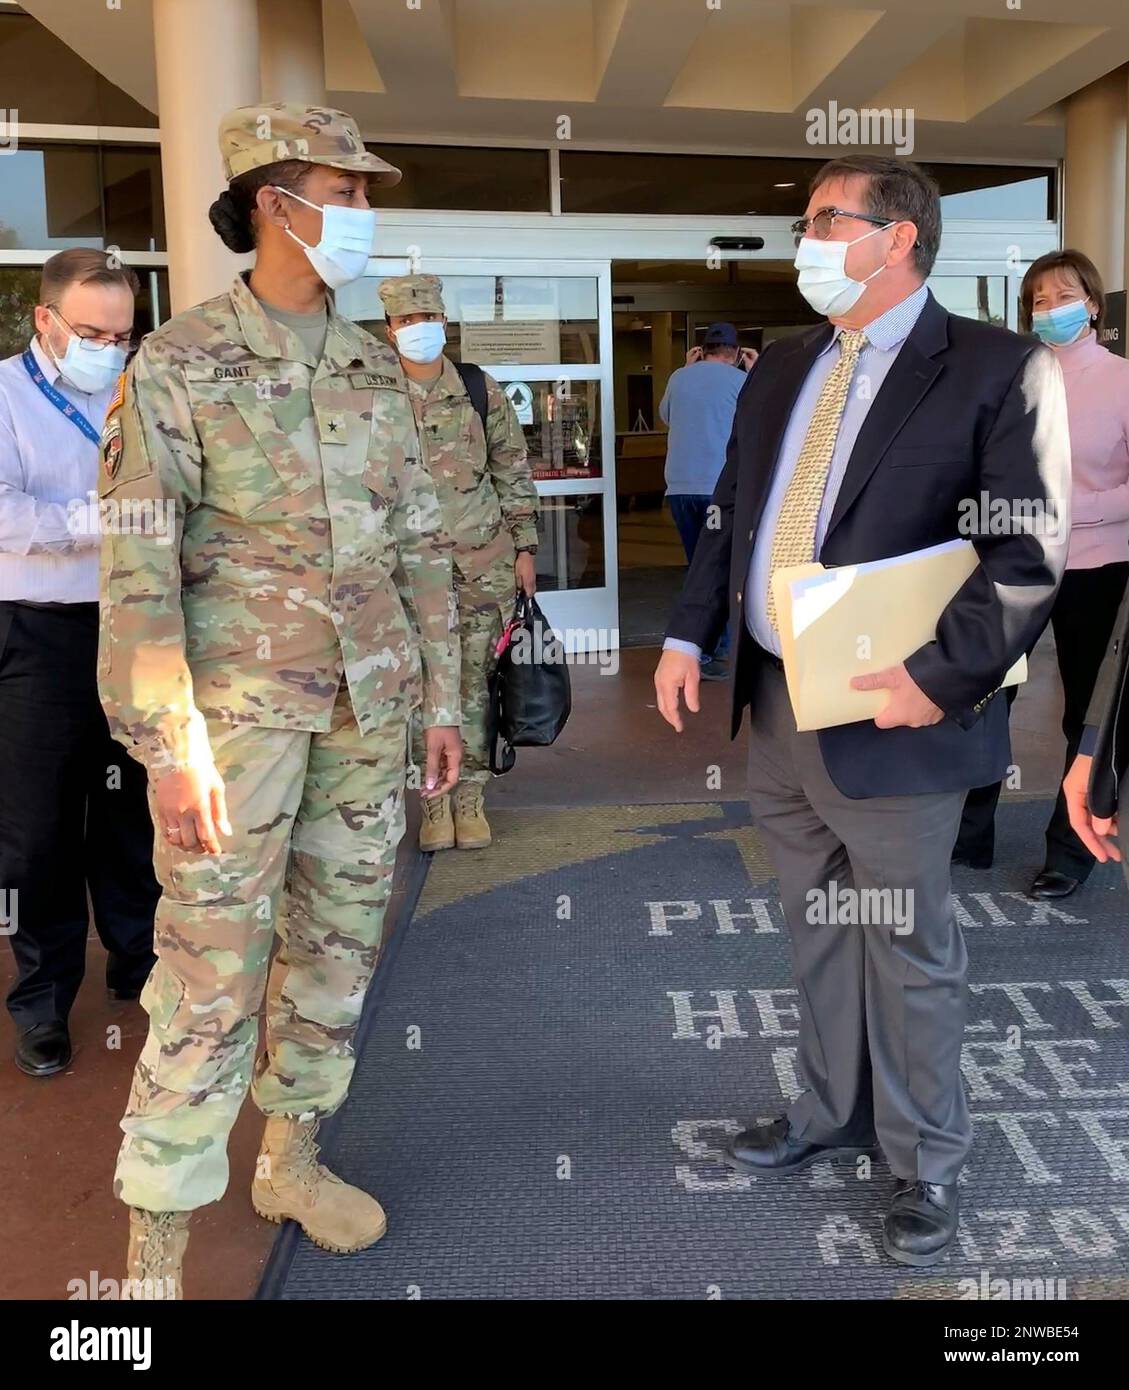 U.S. Army Corps of Engineer South Pacific Division Commander Brig. Gen. Antoinette Gant, left, John Drake, chief of the Corps’ Los Angeles District International and Interagency Services, right, discuss current and future VA Medical Center projects during a tour of the Carl T. Hayden VA Medical center Feb. 2 in Midtown Phoenix. Stock Photo